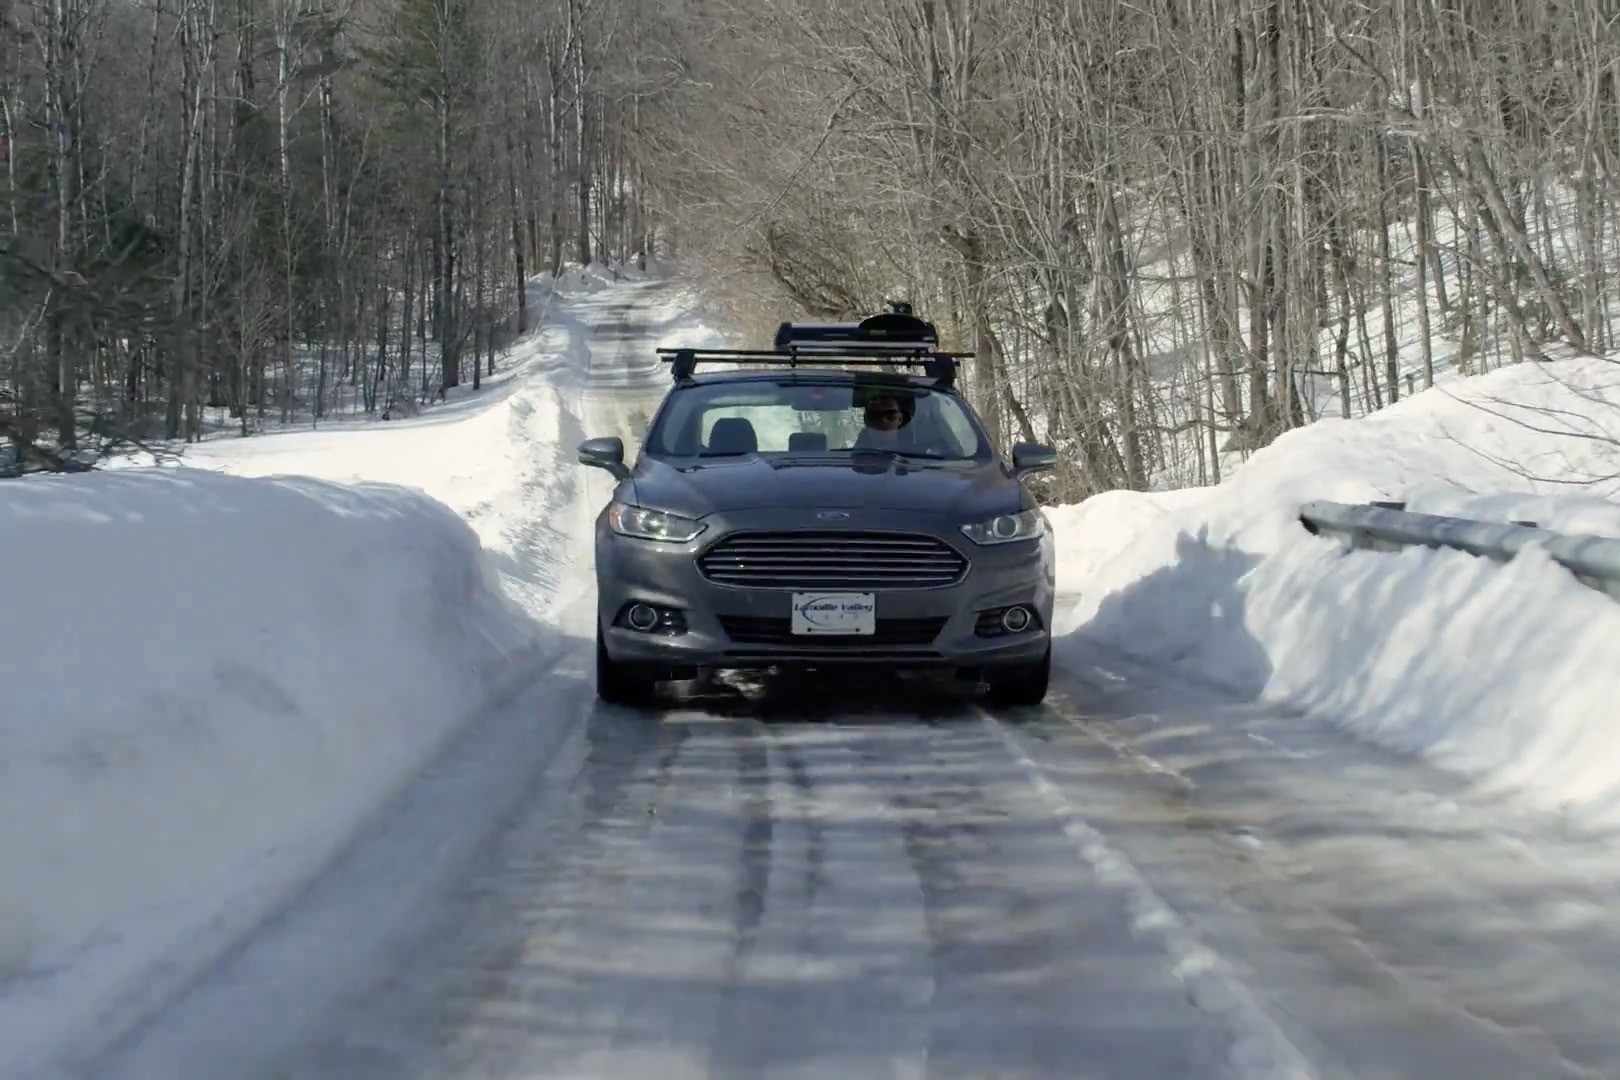 drive-electric-vt-ford-fusion-snowy-road-1.jpg